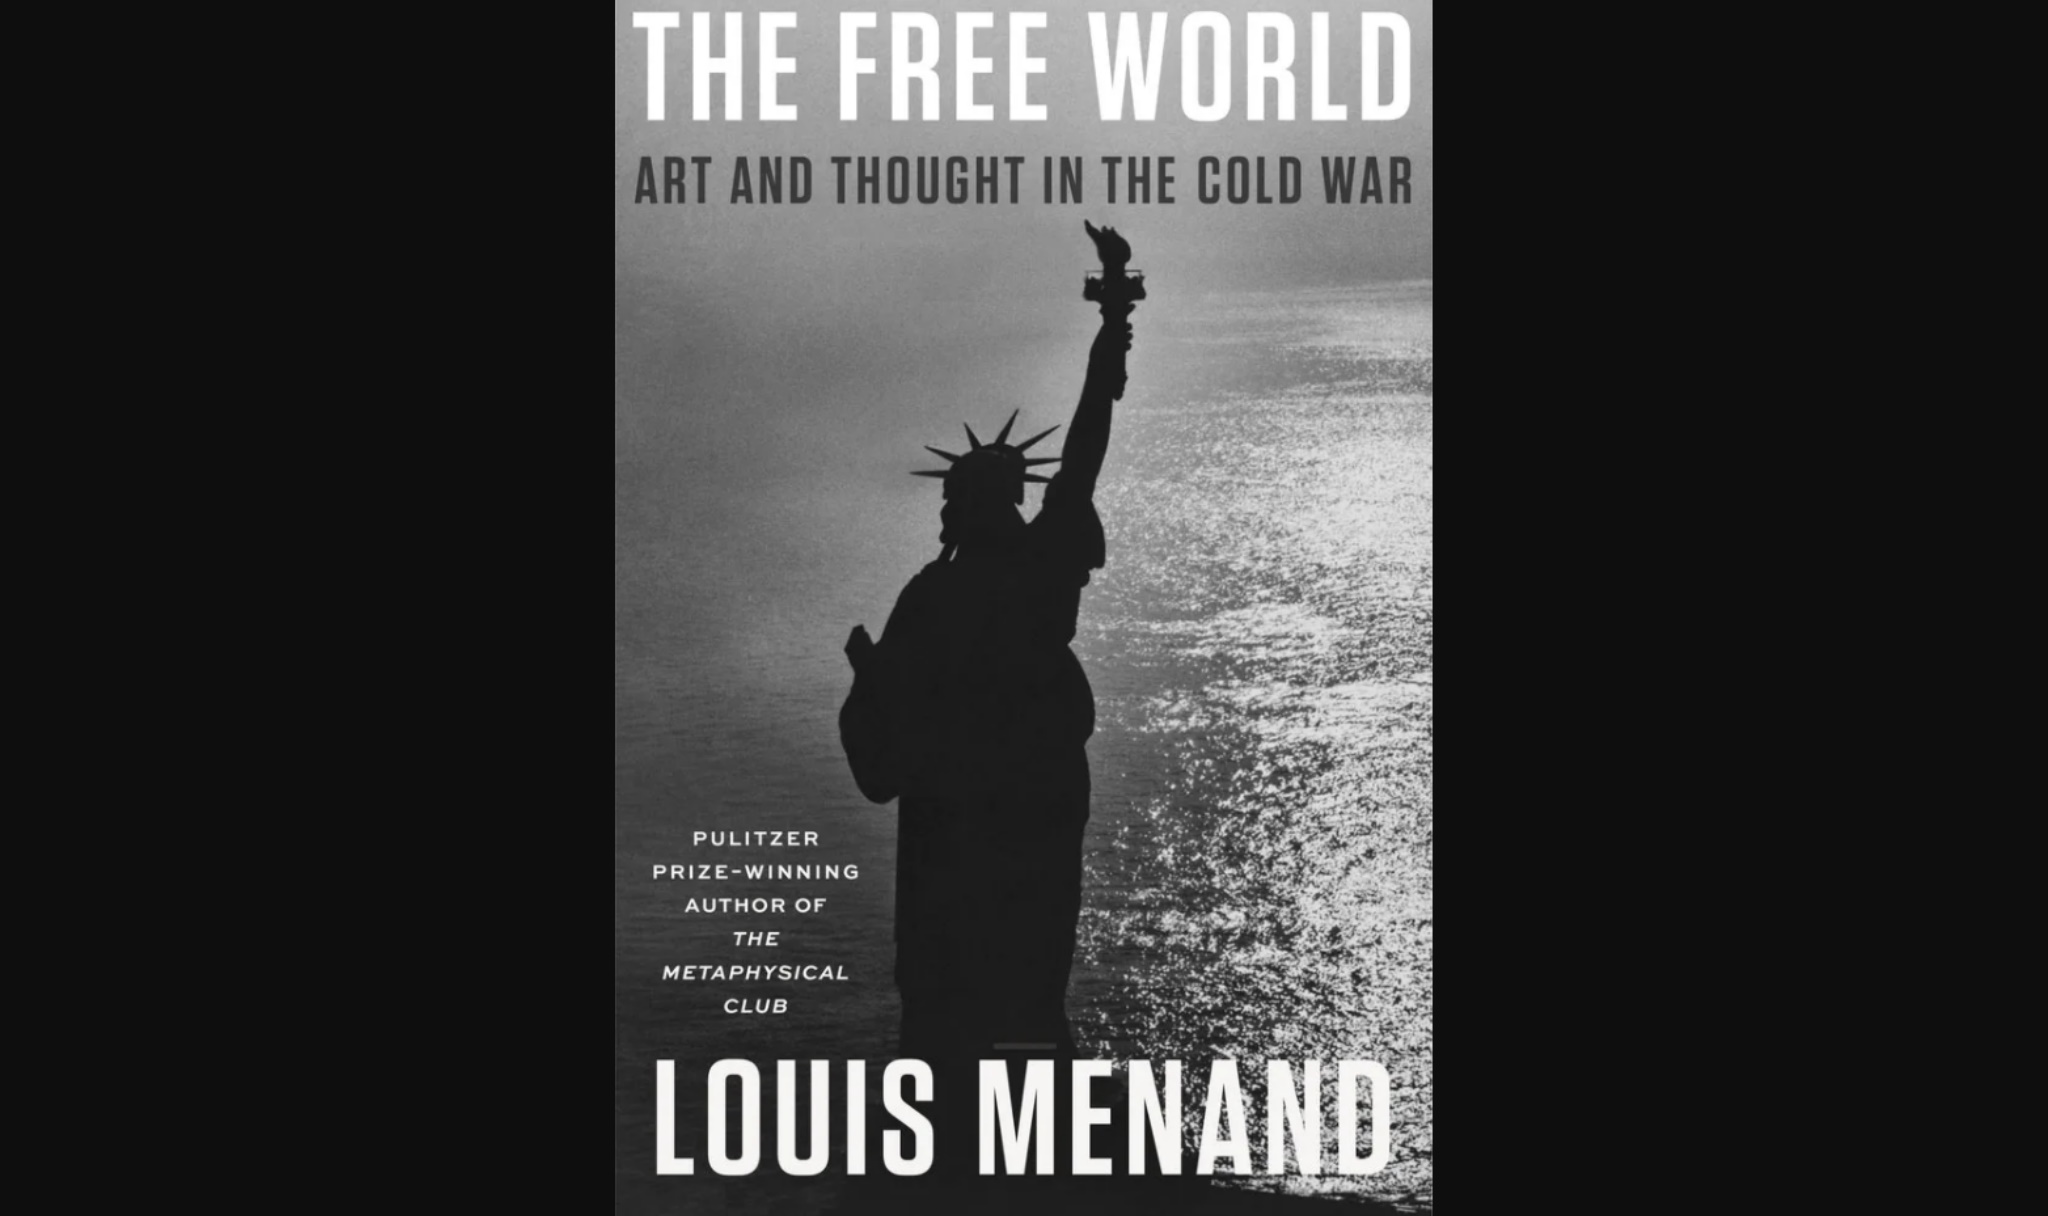 Review of 'The Free World: Art and Thought in the Cold War' by